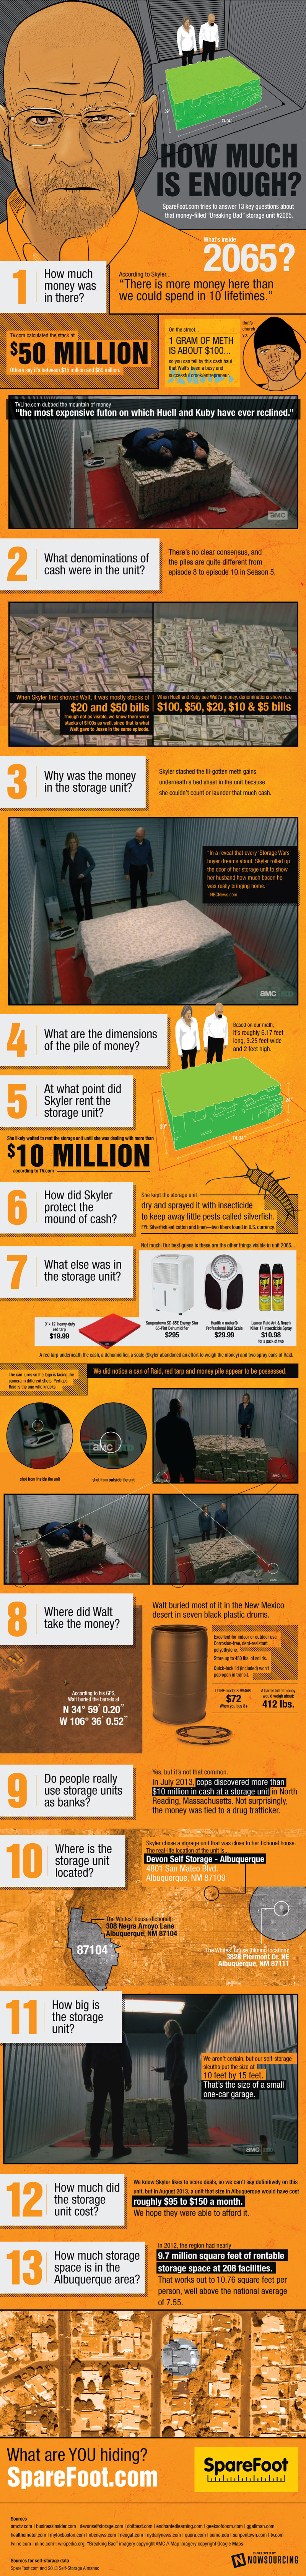 How Much is Enough? Breaking Bad Infographic